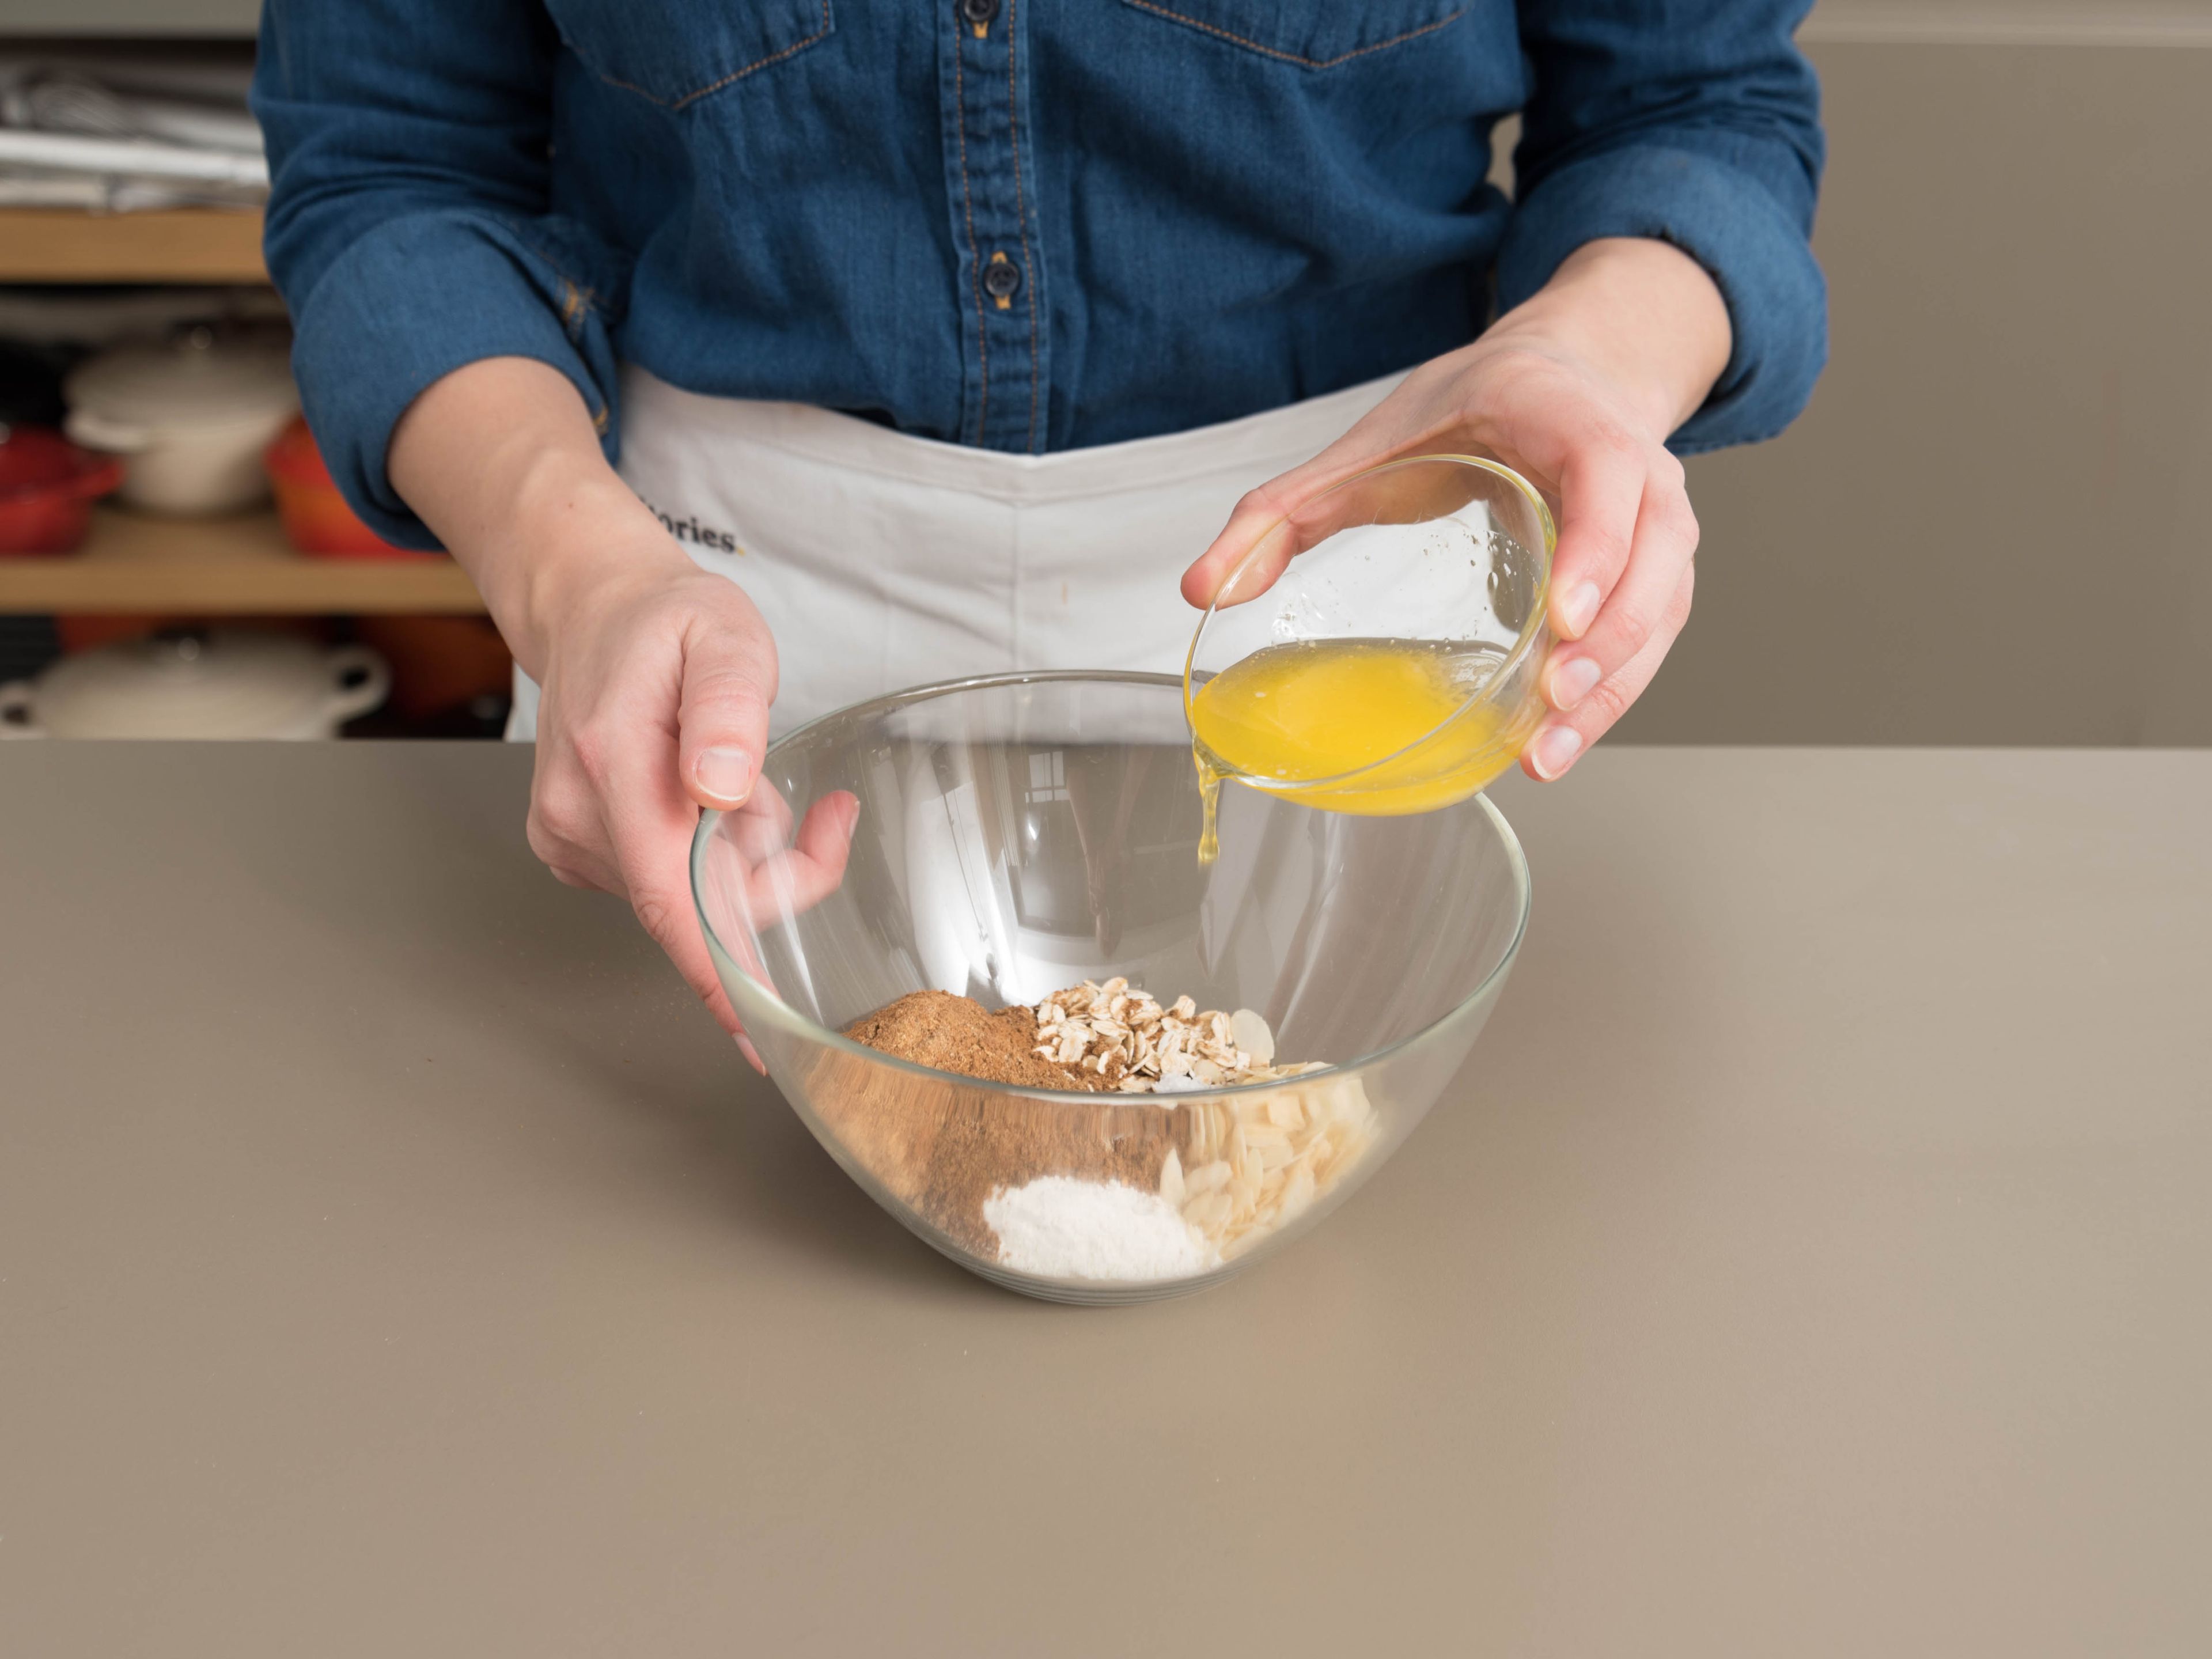 Melt butter in a small saucepan over medium-low heat. Toast almonds over medium heat until fragrant. Combine oats, some of the flour, toasted almonds, Muscovado sugar, salt, and most of the spice mixture in mixing bowl. Stir in butter until combined and crumbly.